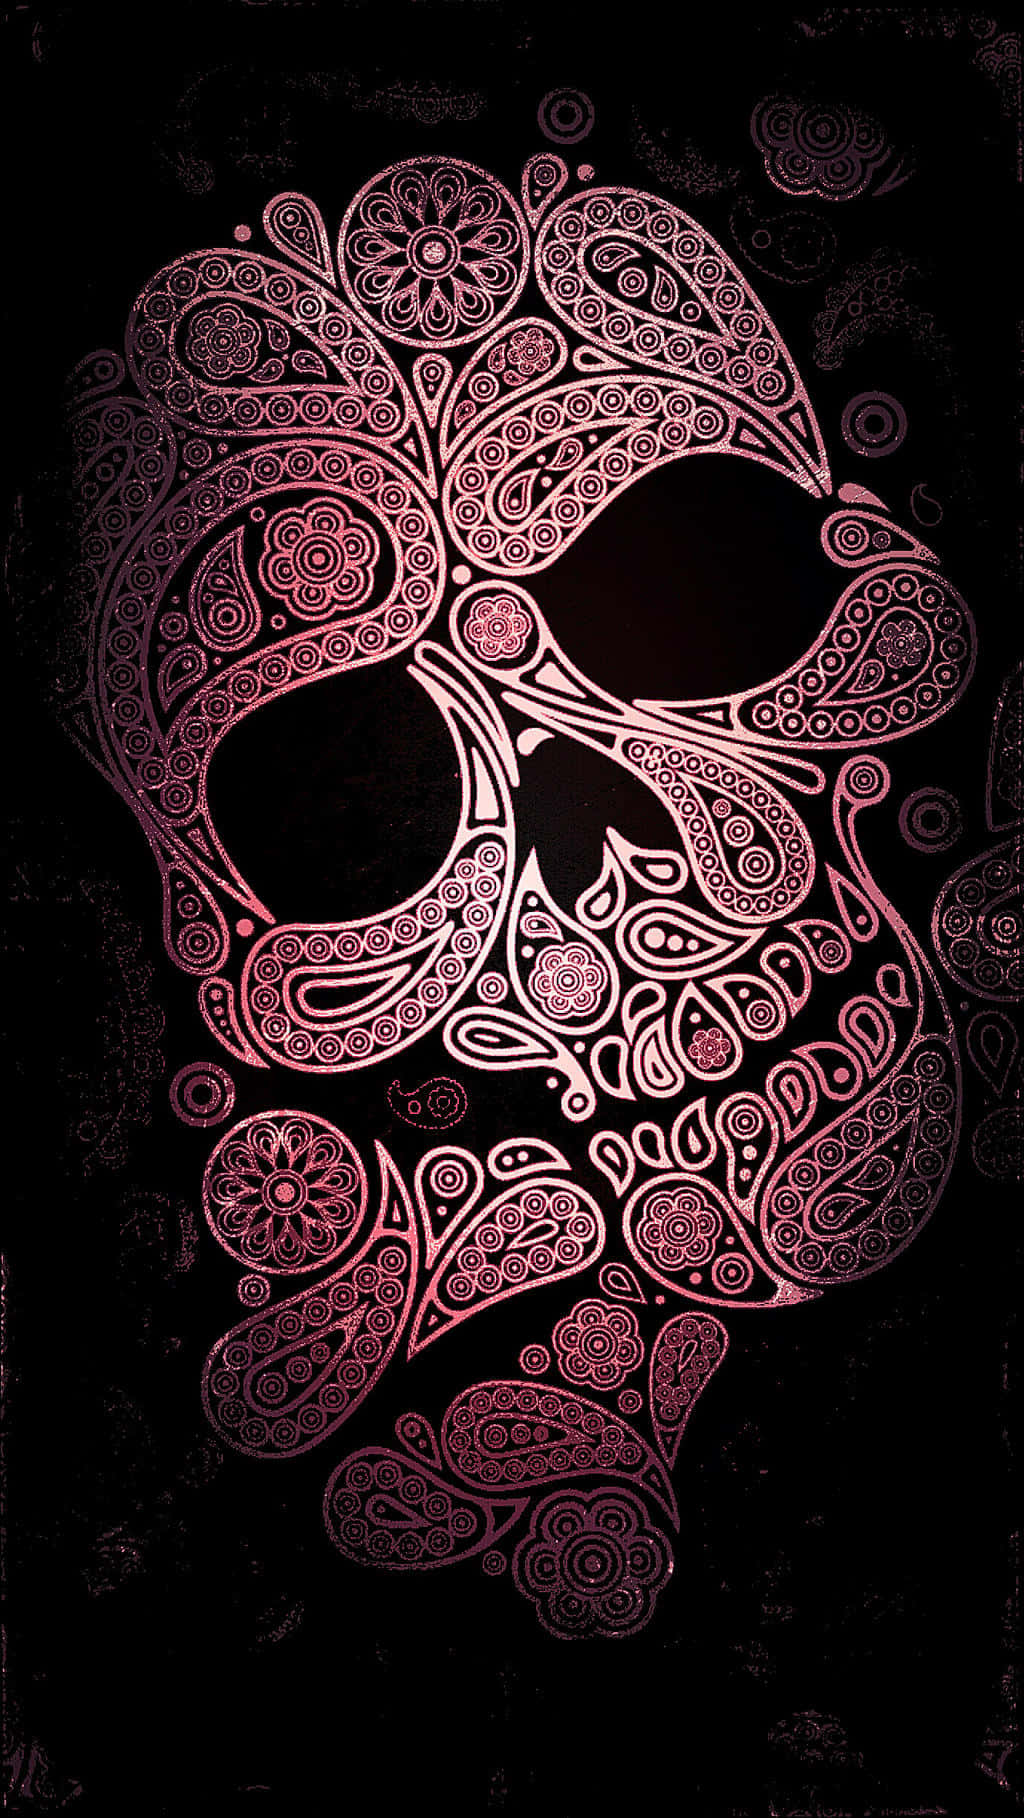 A Skull With A Paisley Pattern On A Black Background Wallpaper